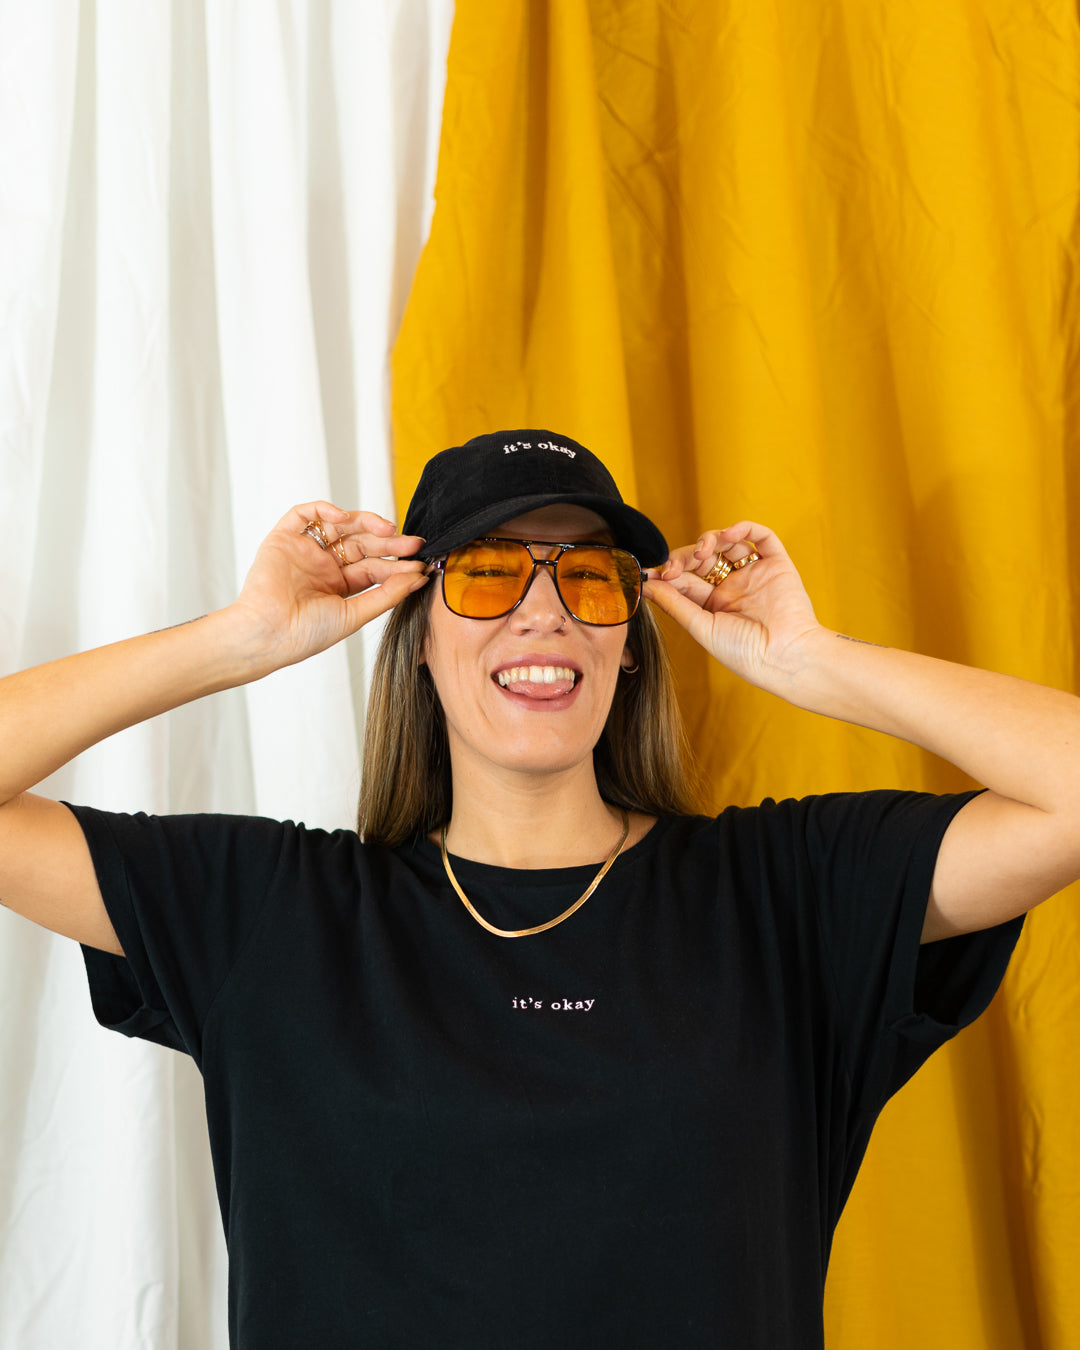 Night cap | cotton needlecord corduroy in black. Embroidered in Portugal. One size fits most | Wear it with pride. It's okay to be exactly who you are. Pt: Boné algodão de pala em bombazine de cor preta, tamanha ajustável.  Image: Girl with it's okay organic essential black t-shirt, sunglasses and night cap. 